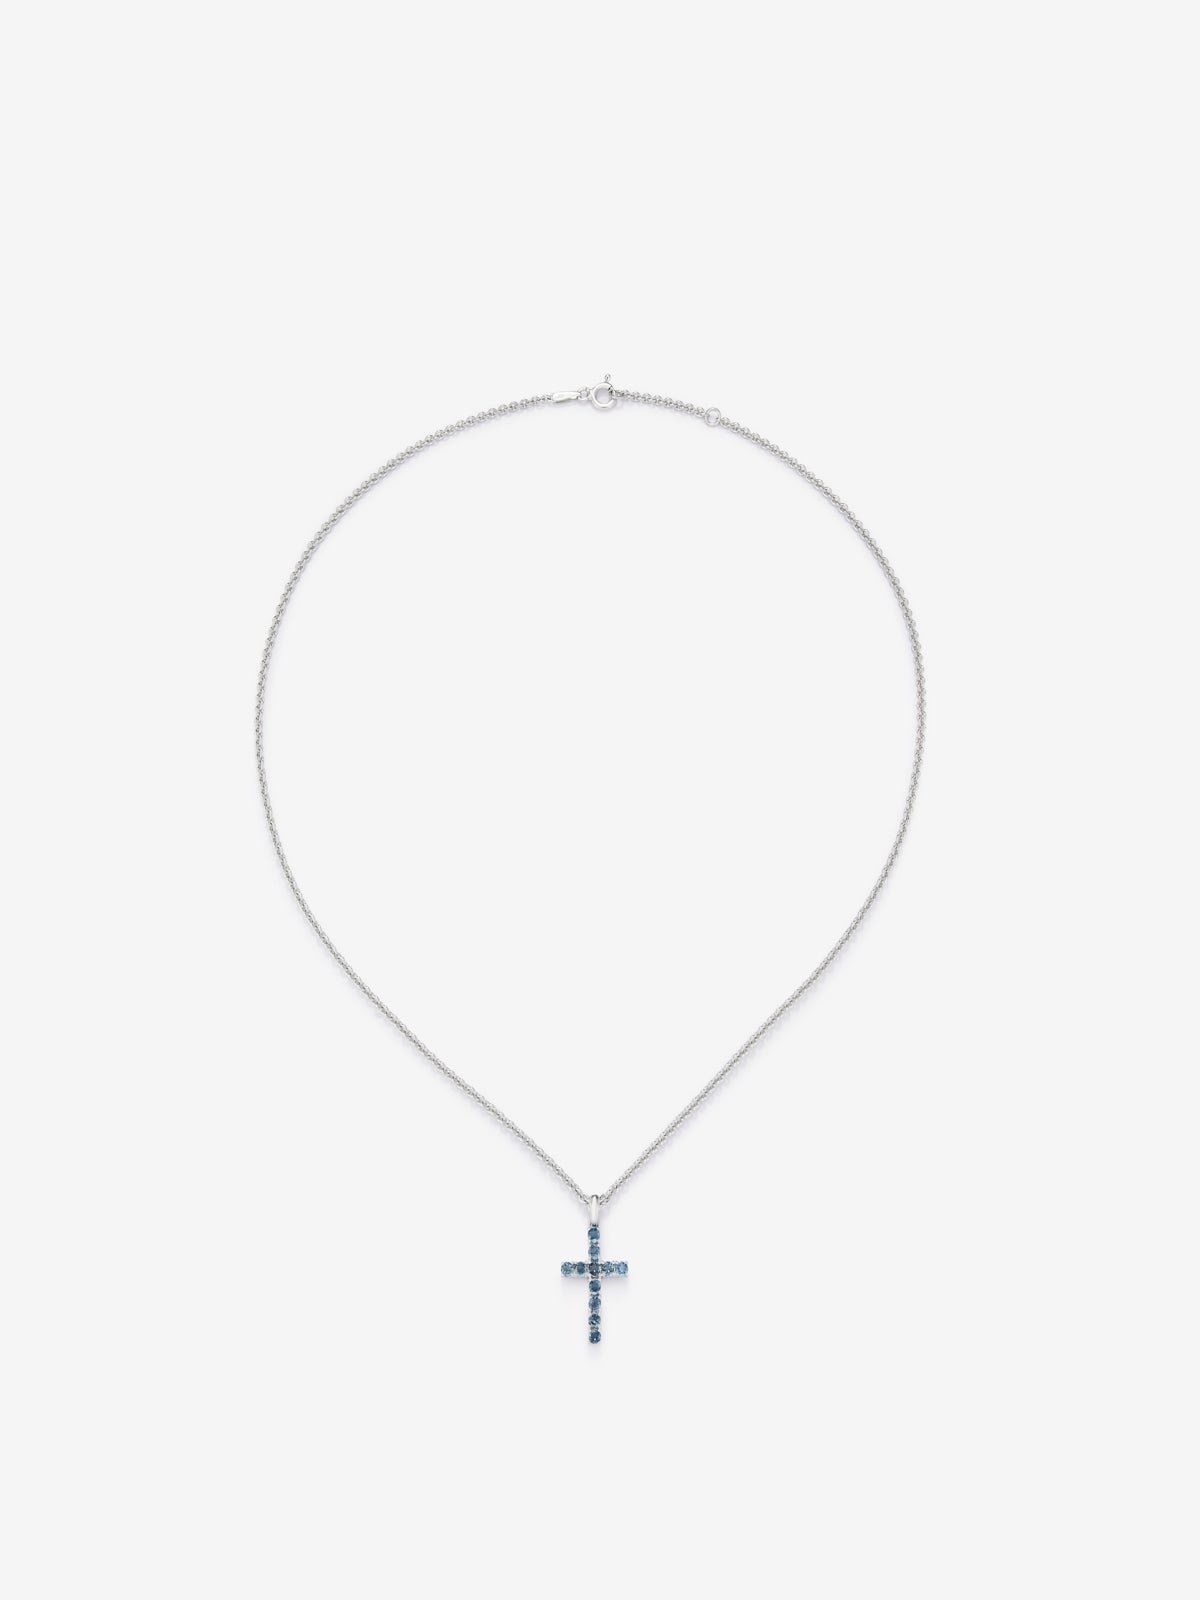 925 silver cross pendant with 11 brilliant-cut London blue topazes with a total of 0.49 cts